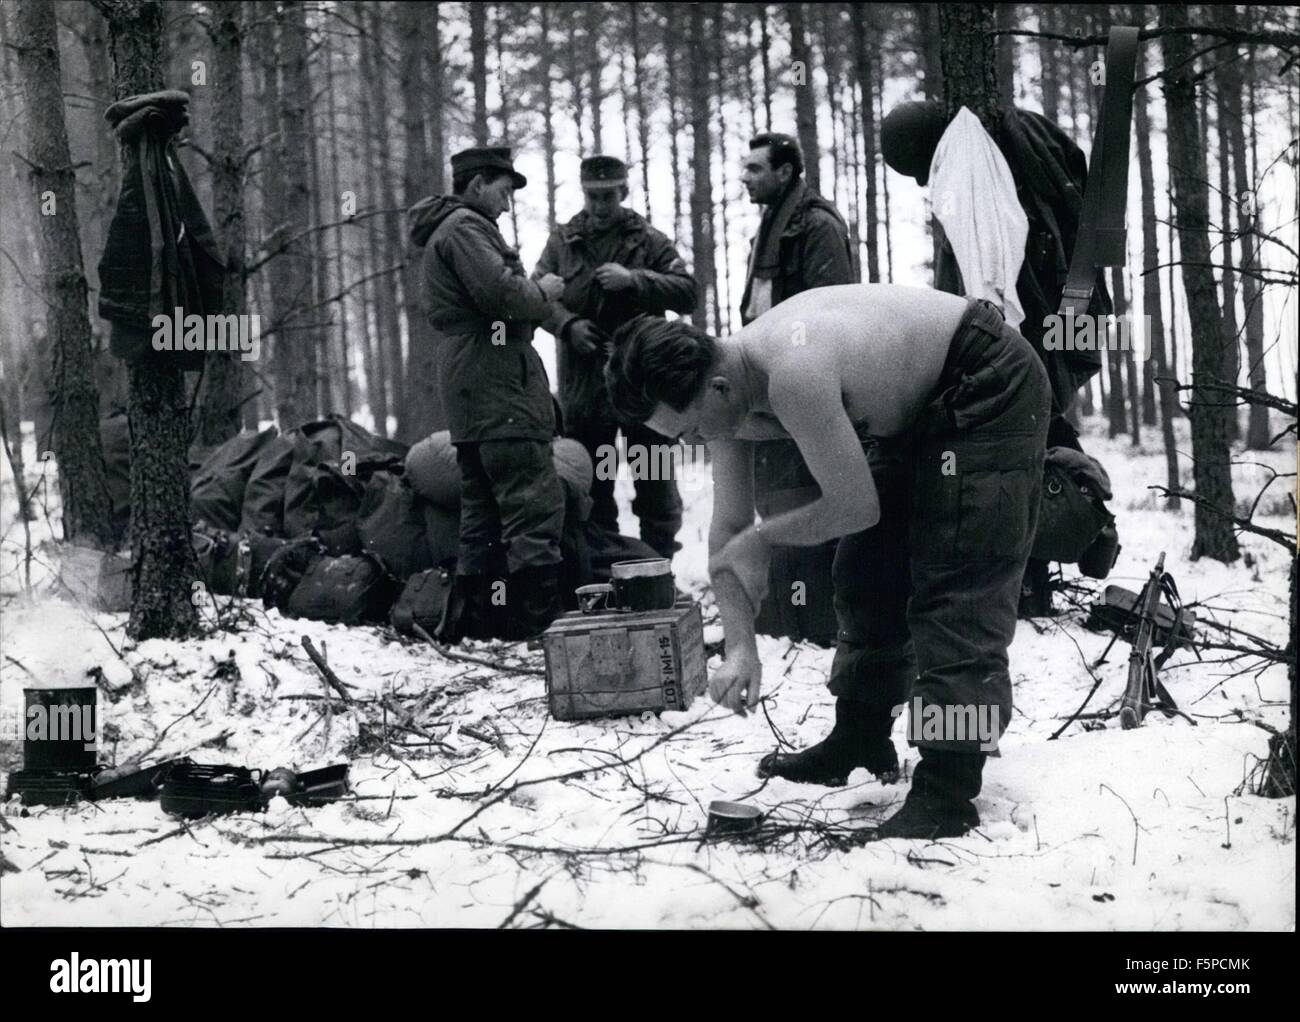 1960 - Snow instead of water As there are no water-pipes in a forest this soldier washed his face with snow and then he went refreshed to the NATO-manoeuvre Winterschild ¬. Keystone Munich 5-2-1960 © Keystone Pictures USA/ZUMAPRESS.com/Alamy Live News Stock Photo